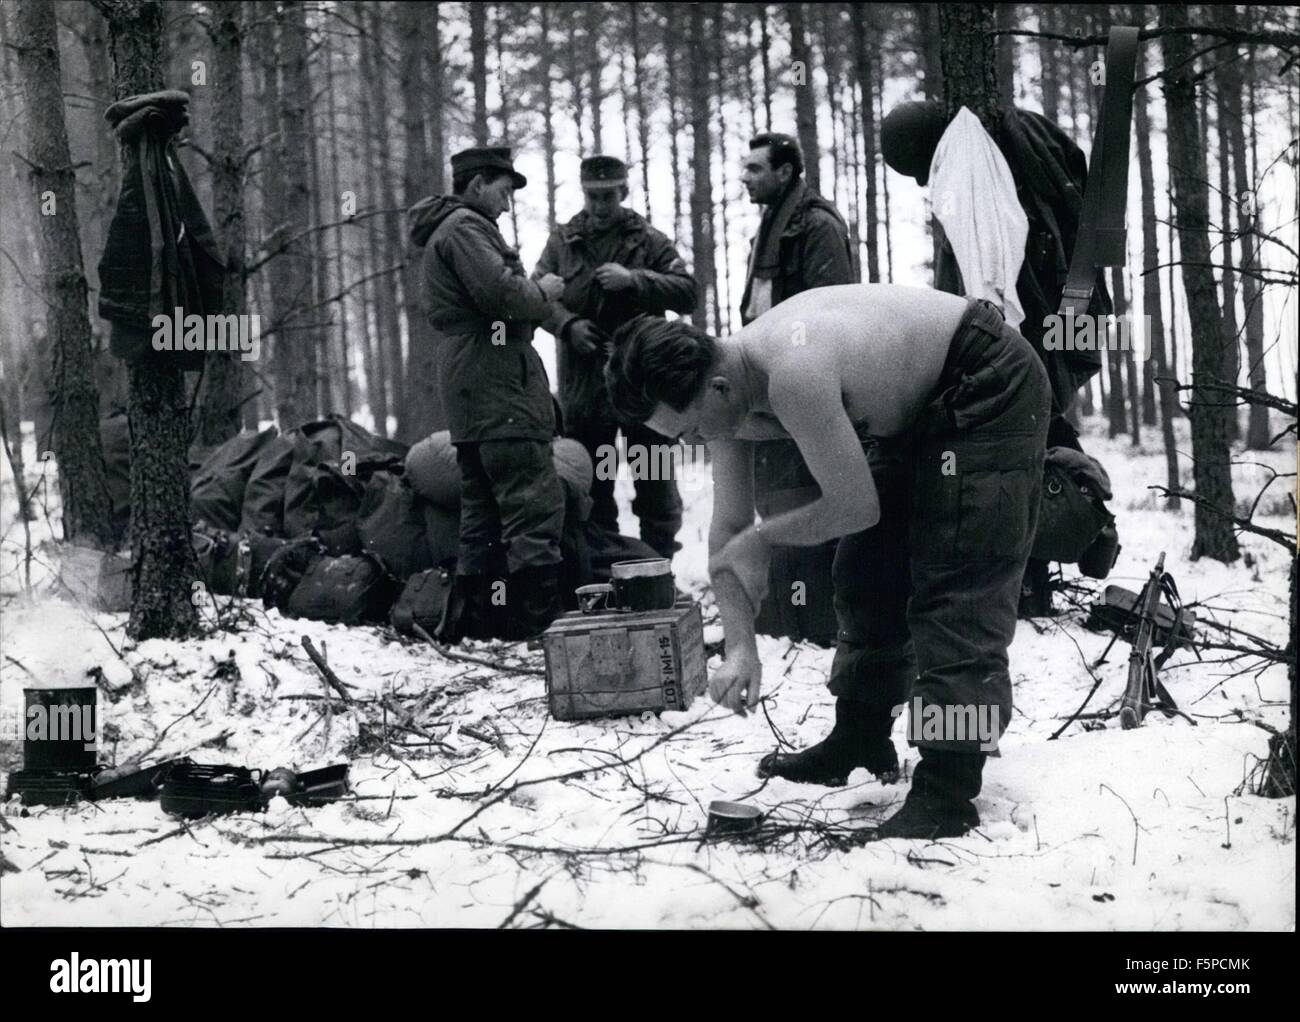 1960 - Snow instead of water As there are no water-pipes in a forest this soldier washed his face with snow and then he went refreshed to the NATO-manoeuvre Winterschild ¬. Keystone Munich 5-2-1960 © Keystone Pictures USA/ZUMAPRESS.com/Alamy Live News Stock Photo